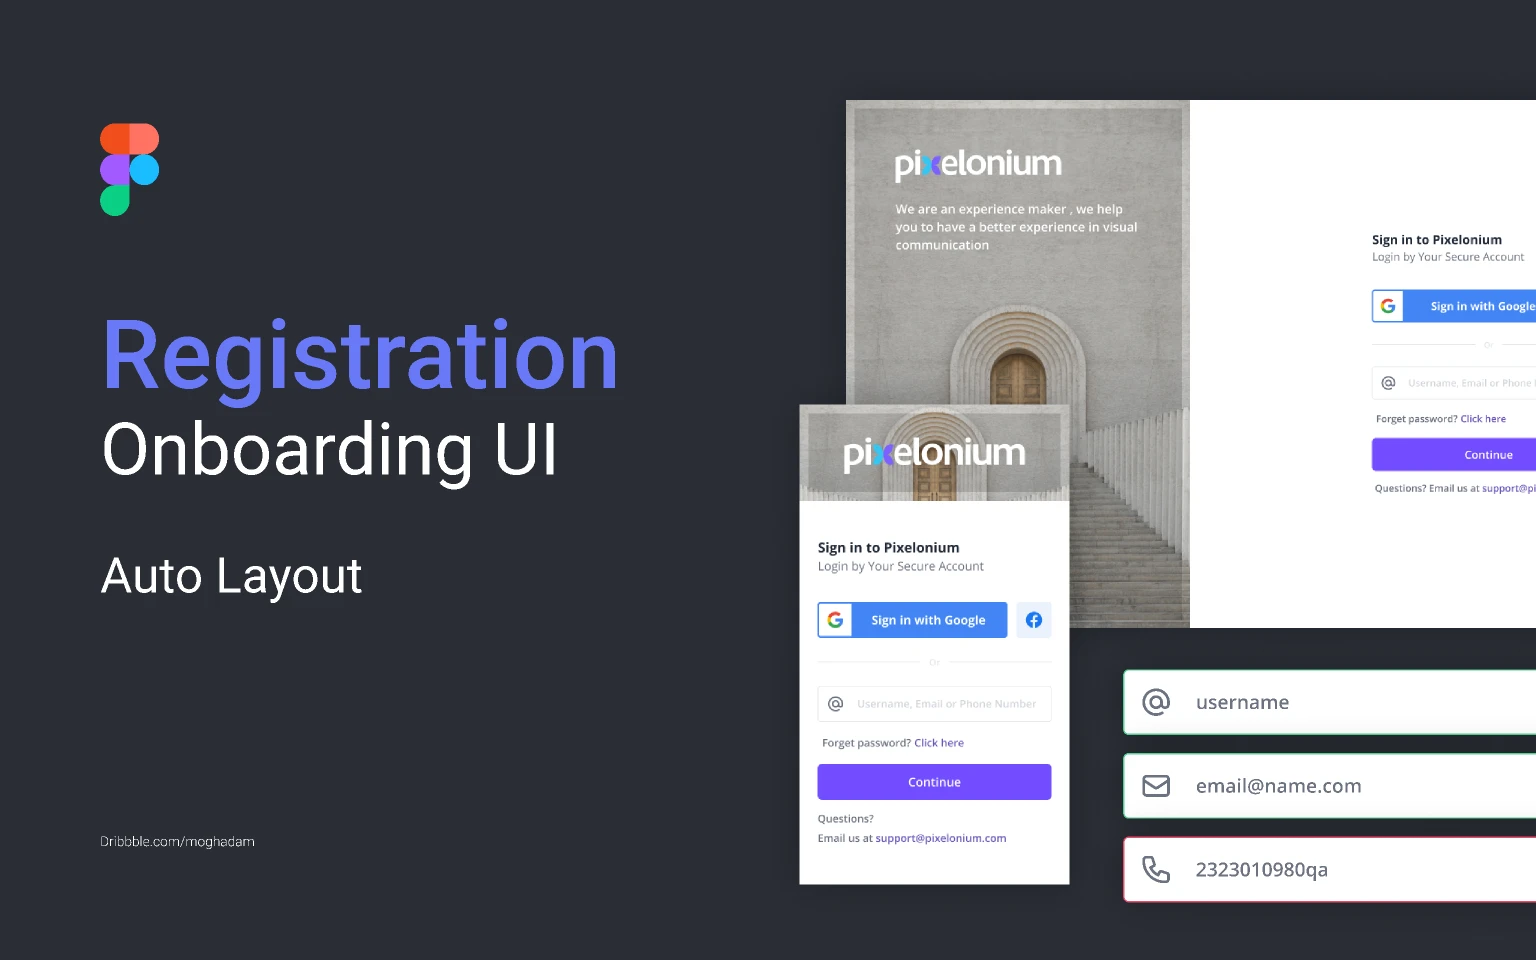 Registration Onboarding UI for Figma and Adobe XD